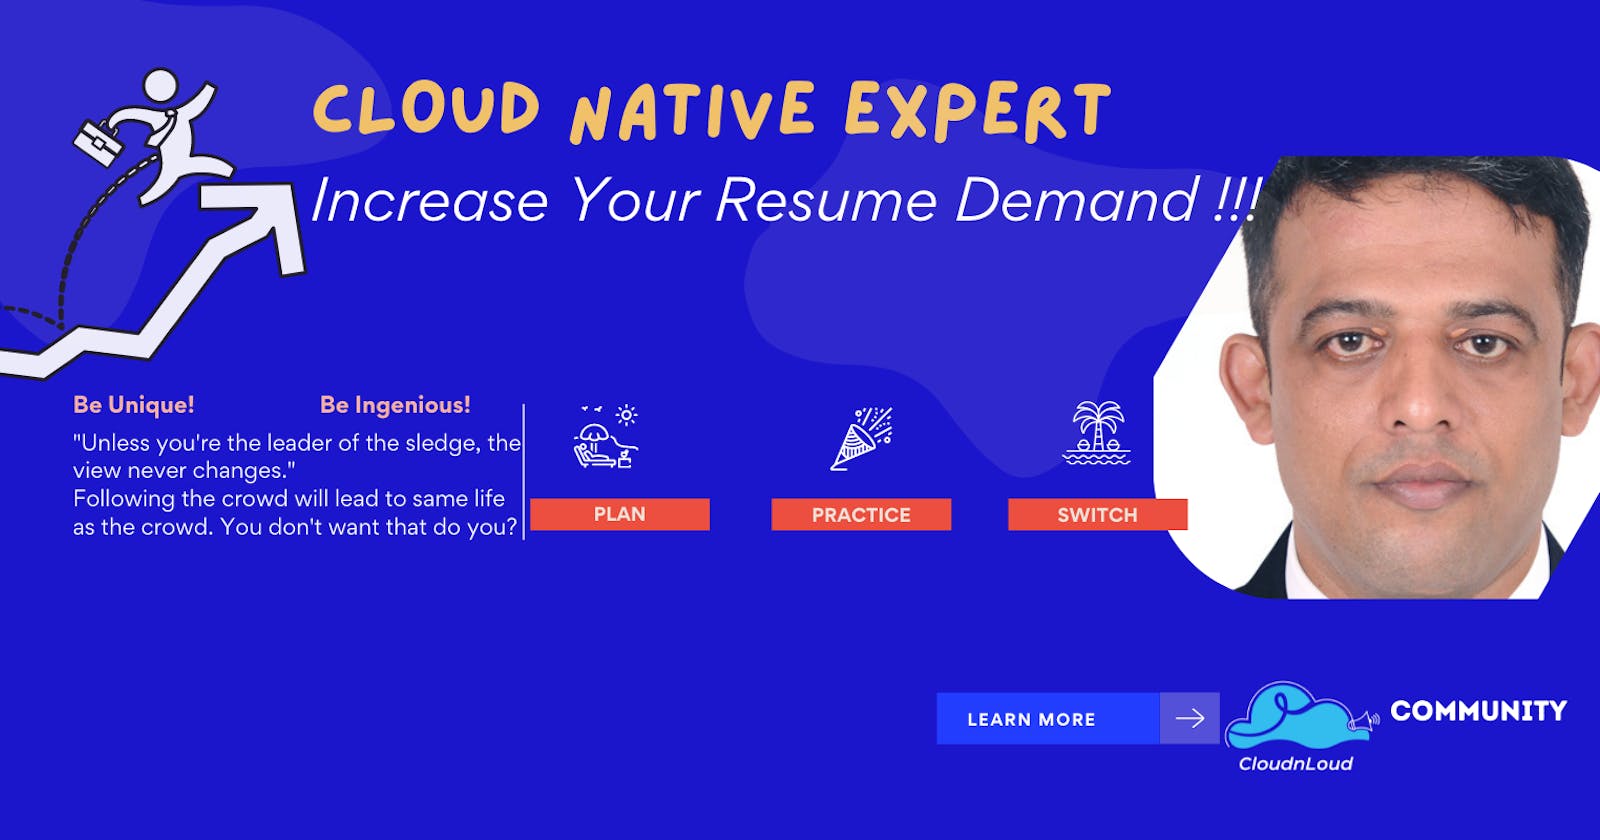 Want to Become Cloud Native Expert?